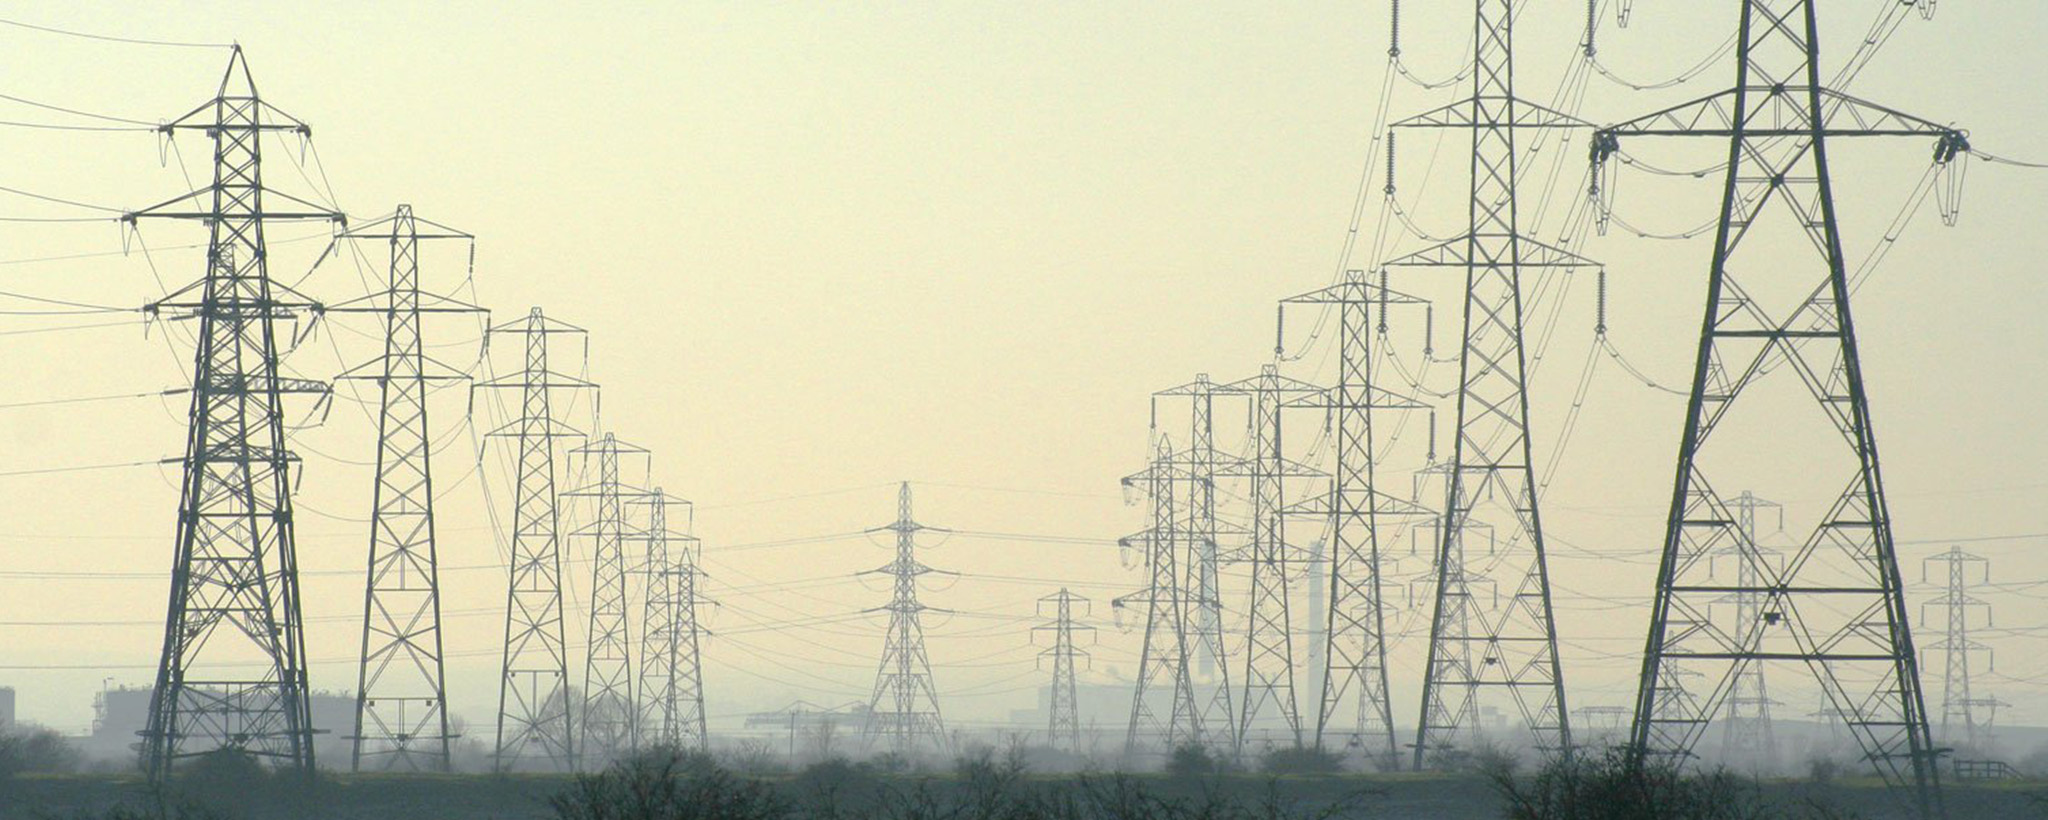 A series of electric power lines over a foggy field